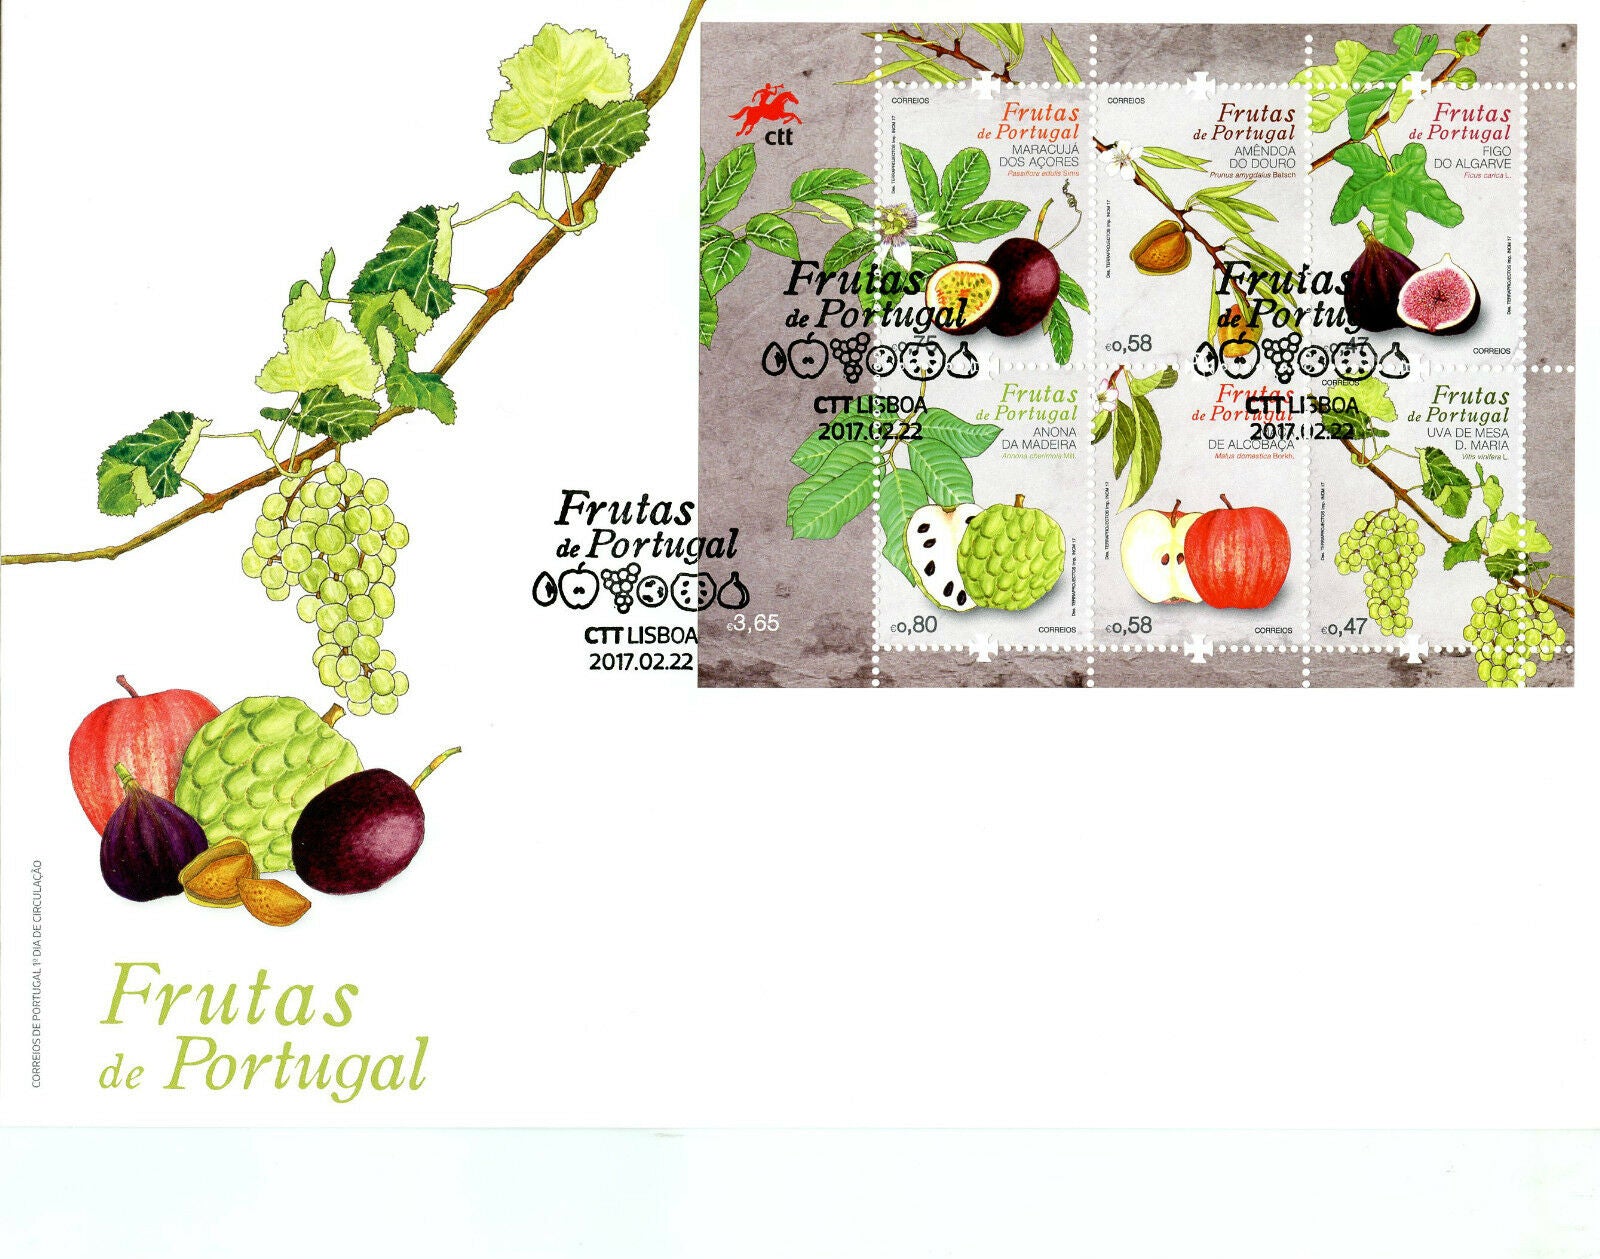 Portugal 2017 FDC Fruit Fruits Grapes Apples 6v M/S Cover Plants Trees Stamps